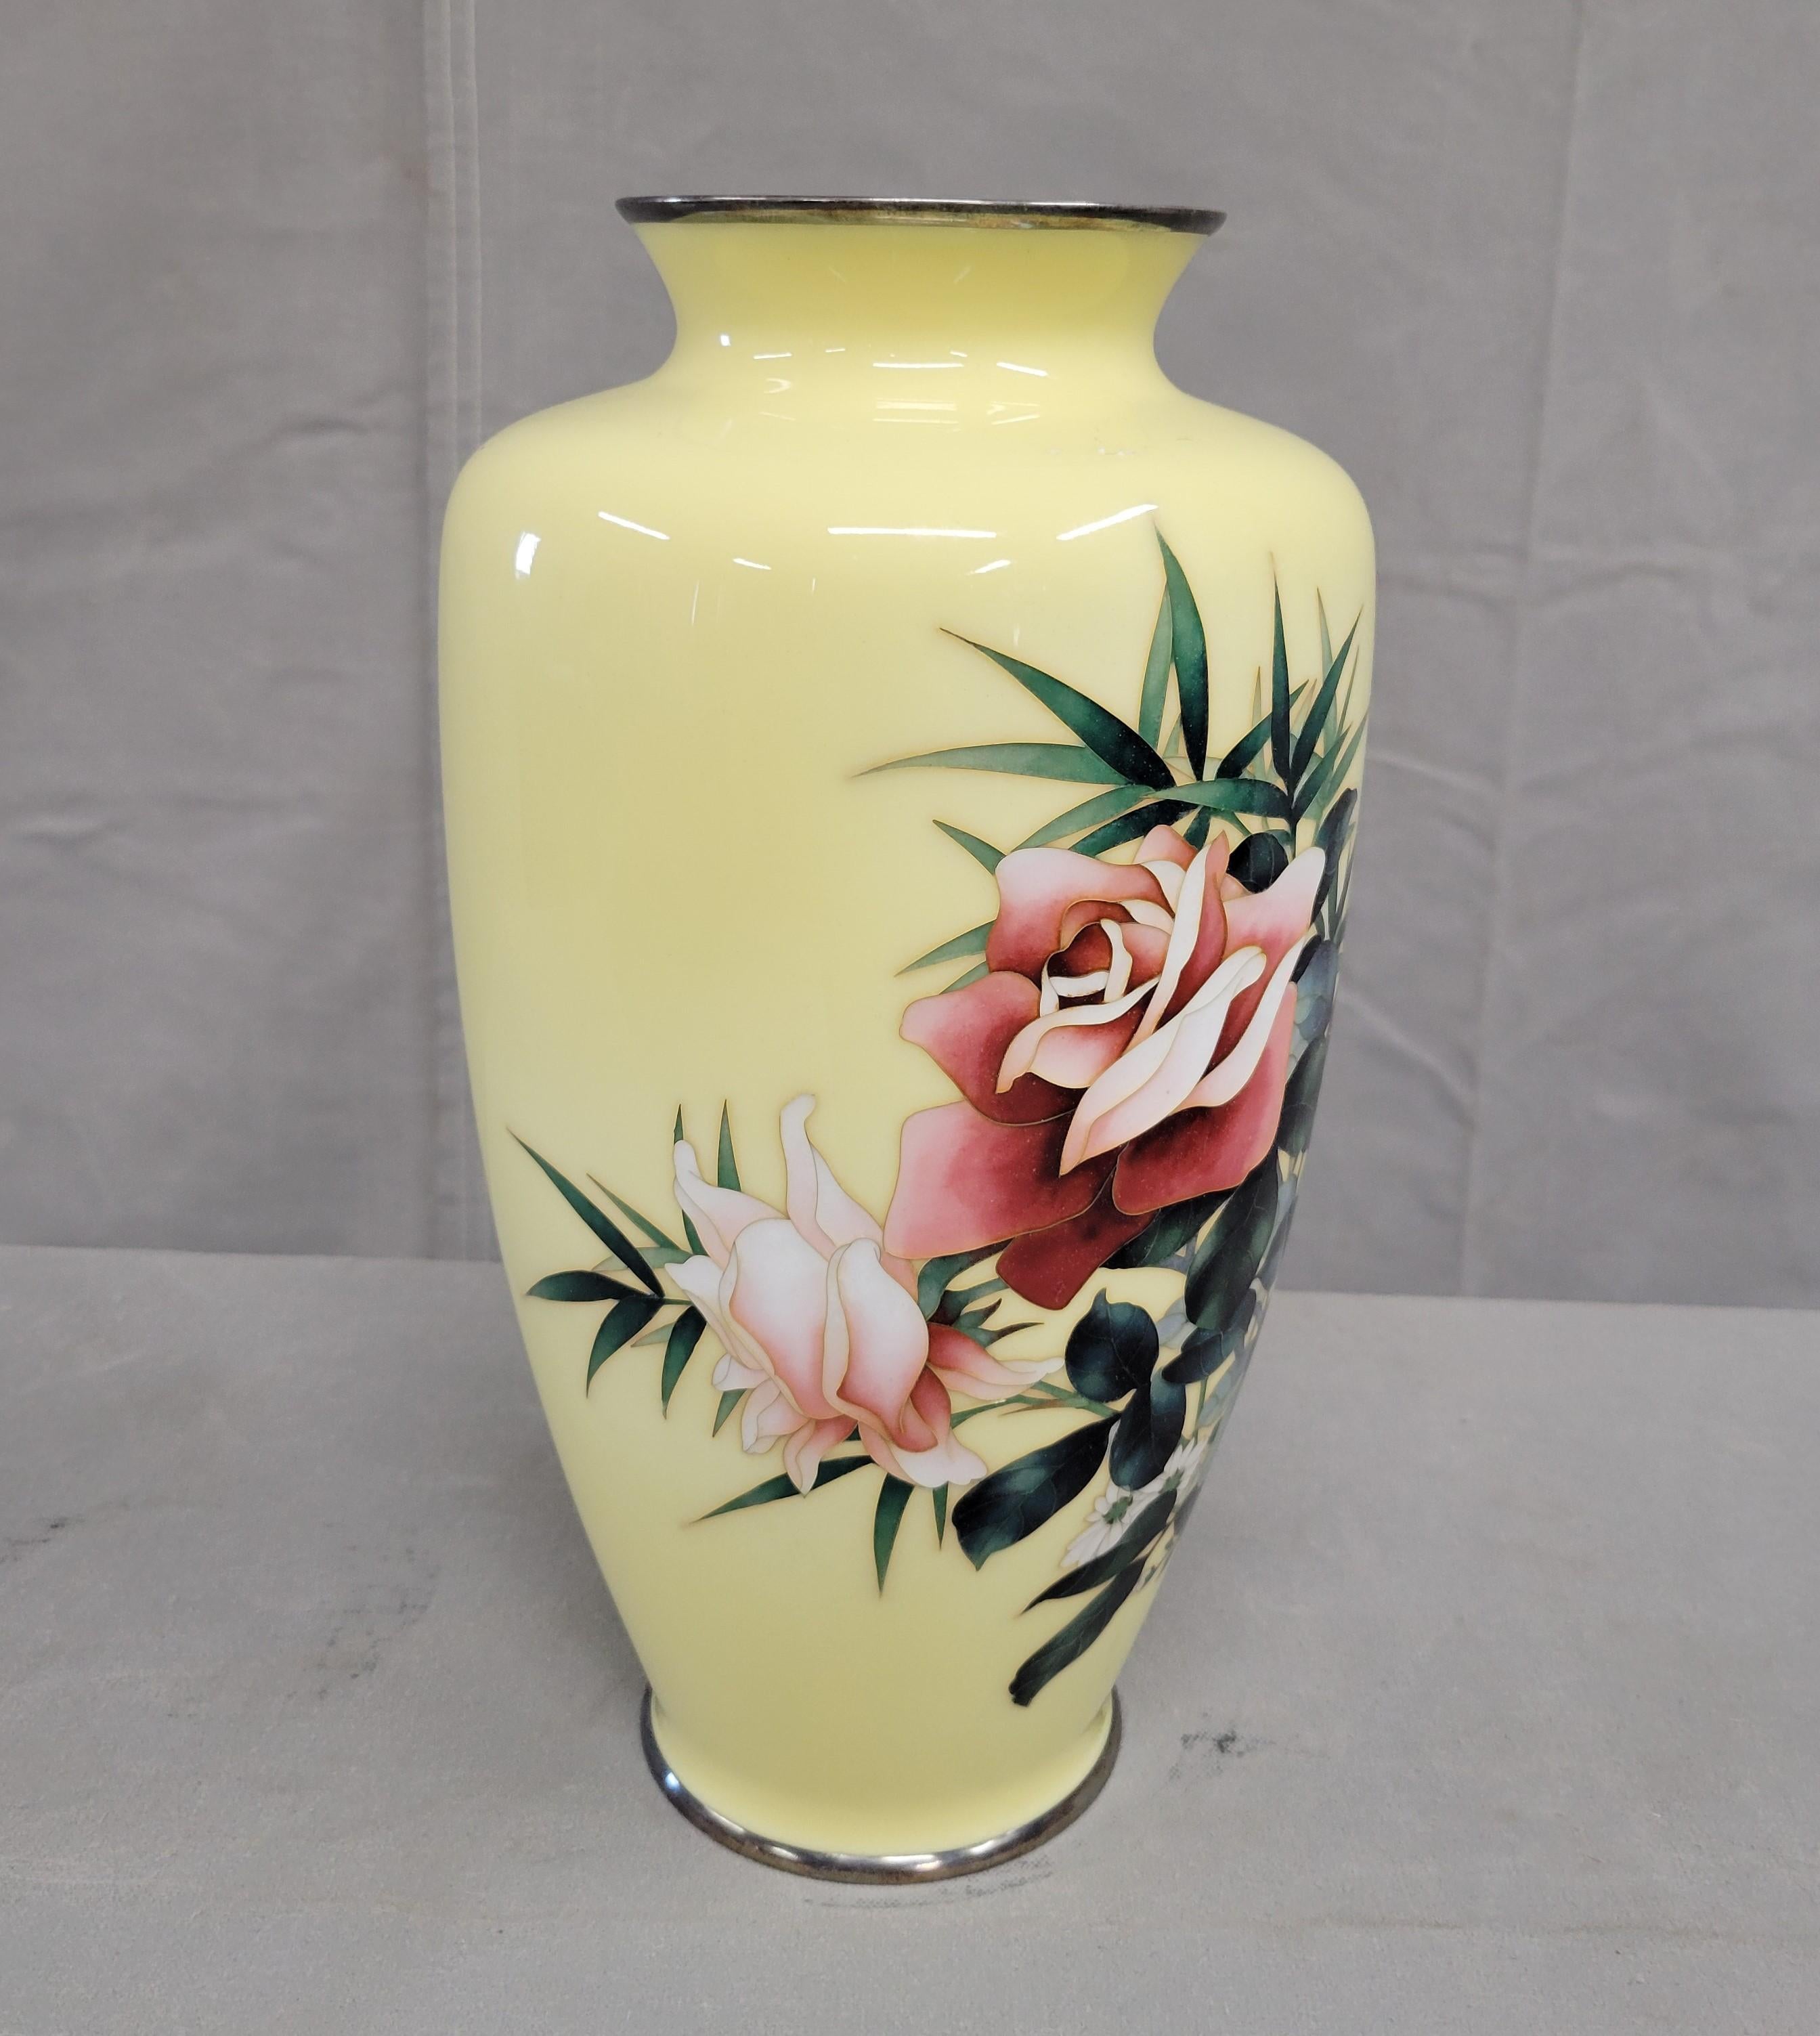 Edo Vintage Japanese Ando Jubei (1876-1956) Signed Cloisonné Vase With Roses For Sale